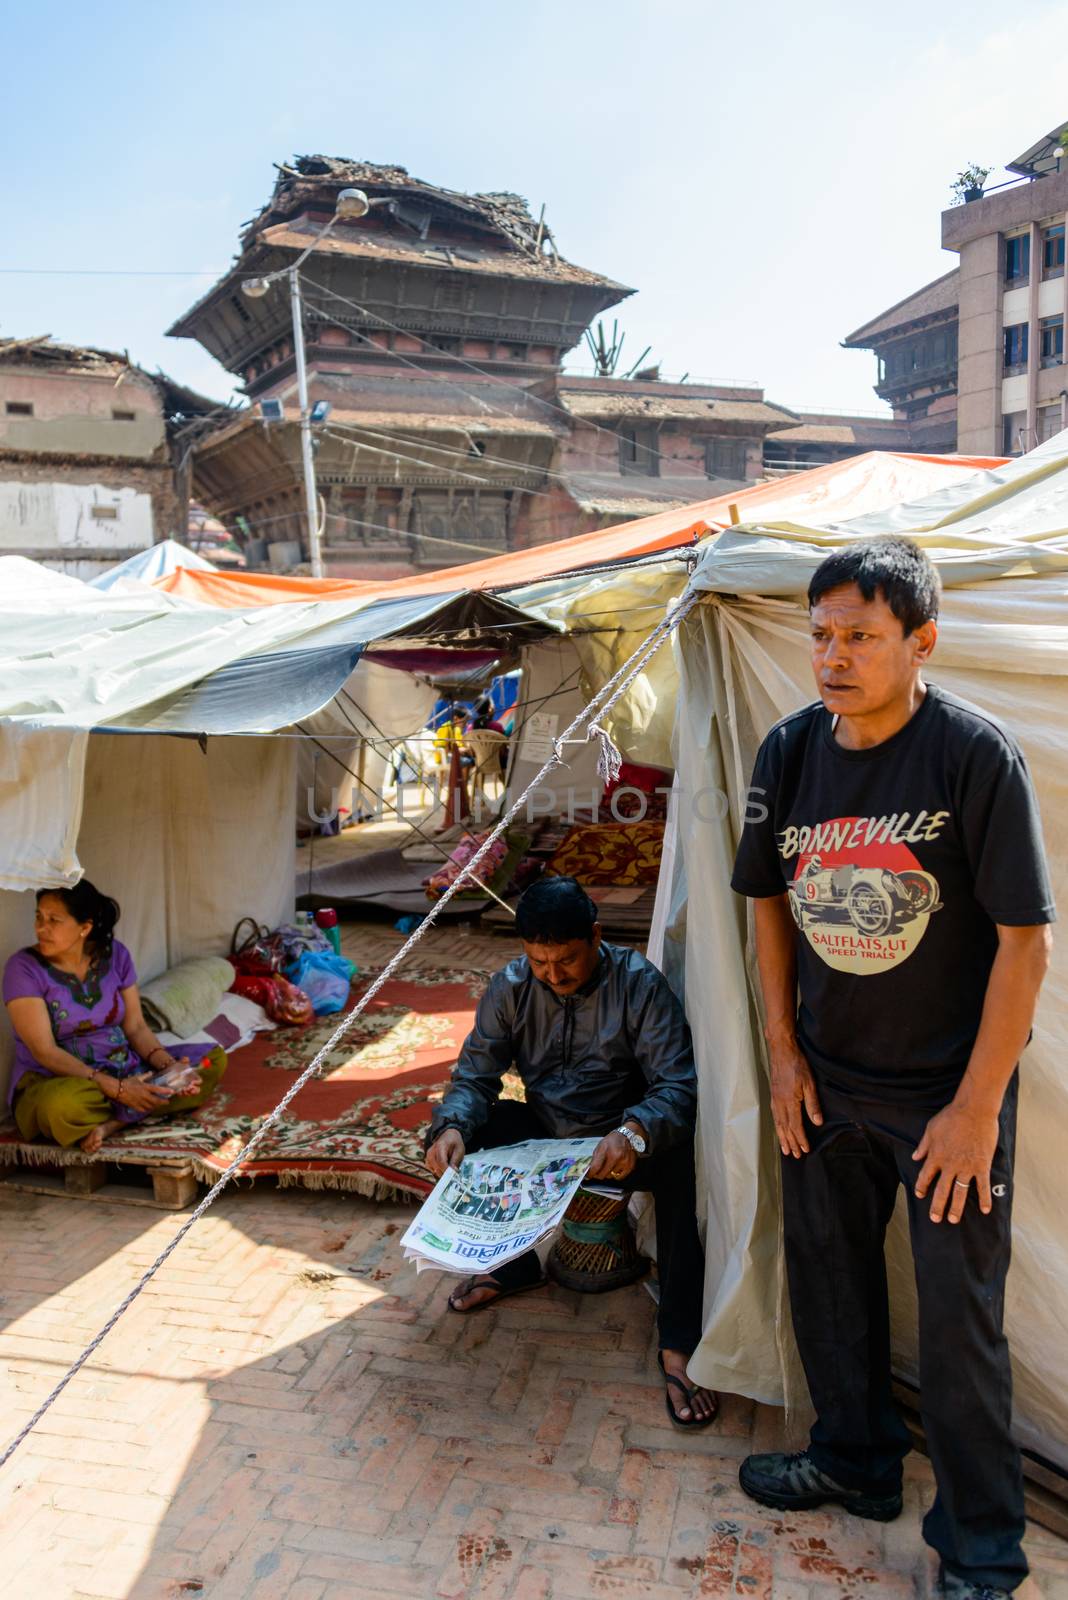 KATHMANDU, NEPAL - MAY 14, 2015: A makeshift campsite is set up at Durbar Square after two major earthquakes hit Nepal in the past weeks.